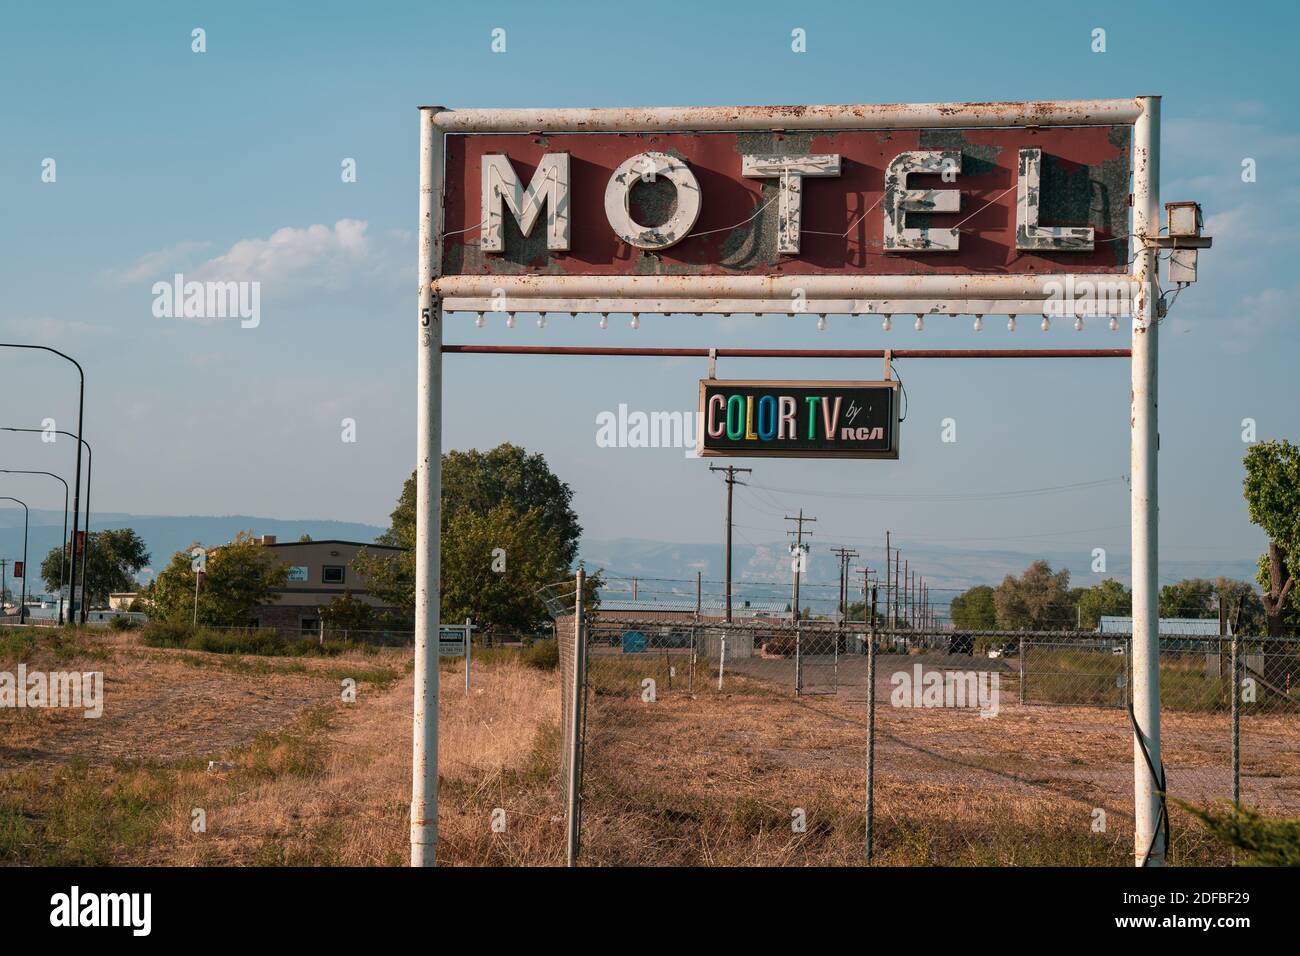 Vernal, Utah - September 20, 2020: Rusty, old motel neon sign, with a vintage color TV by RCA plaque Stock Photo